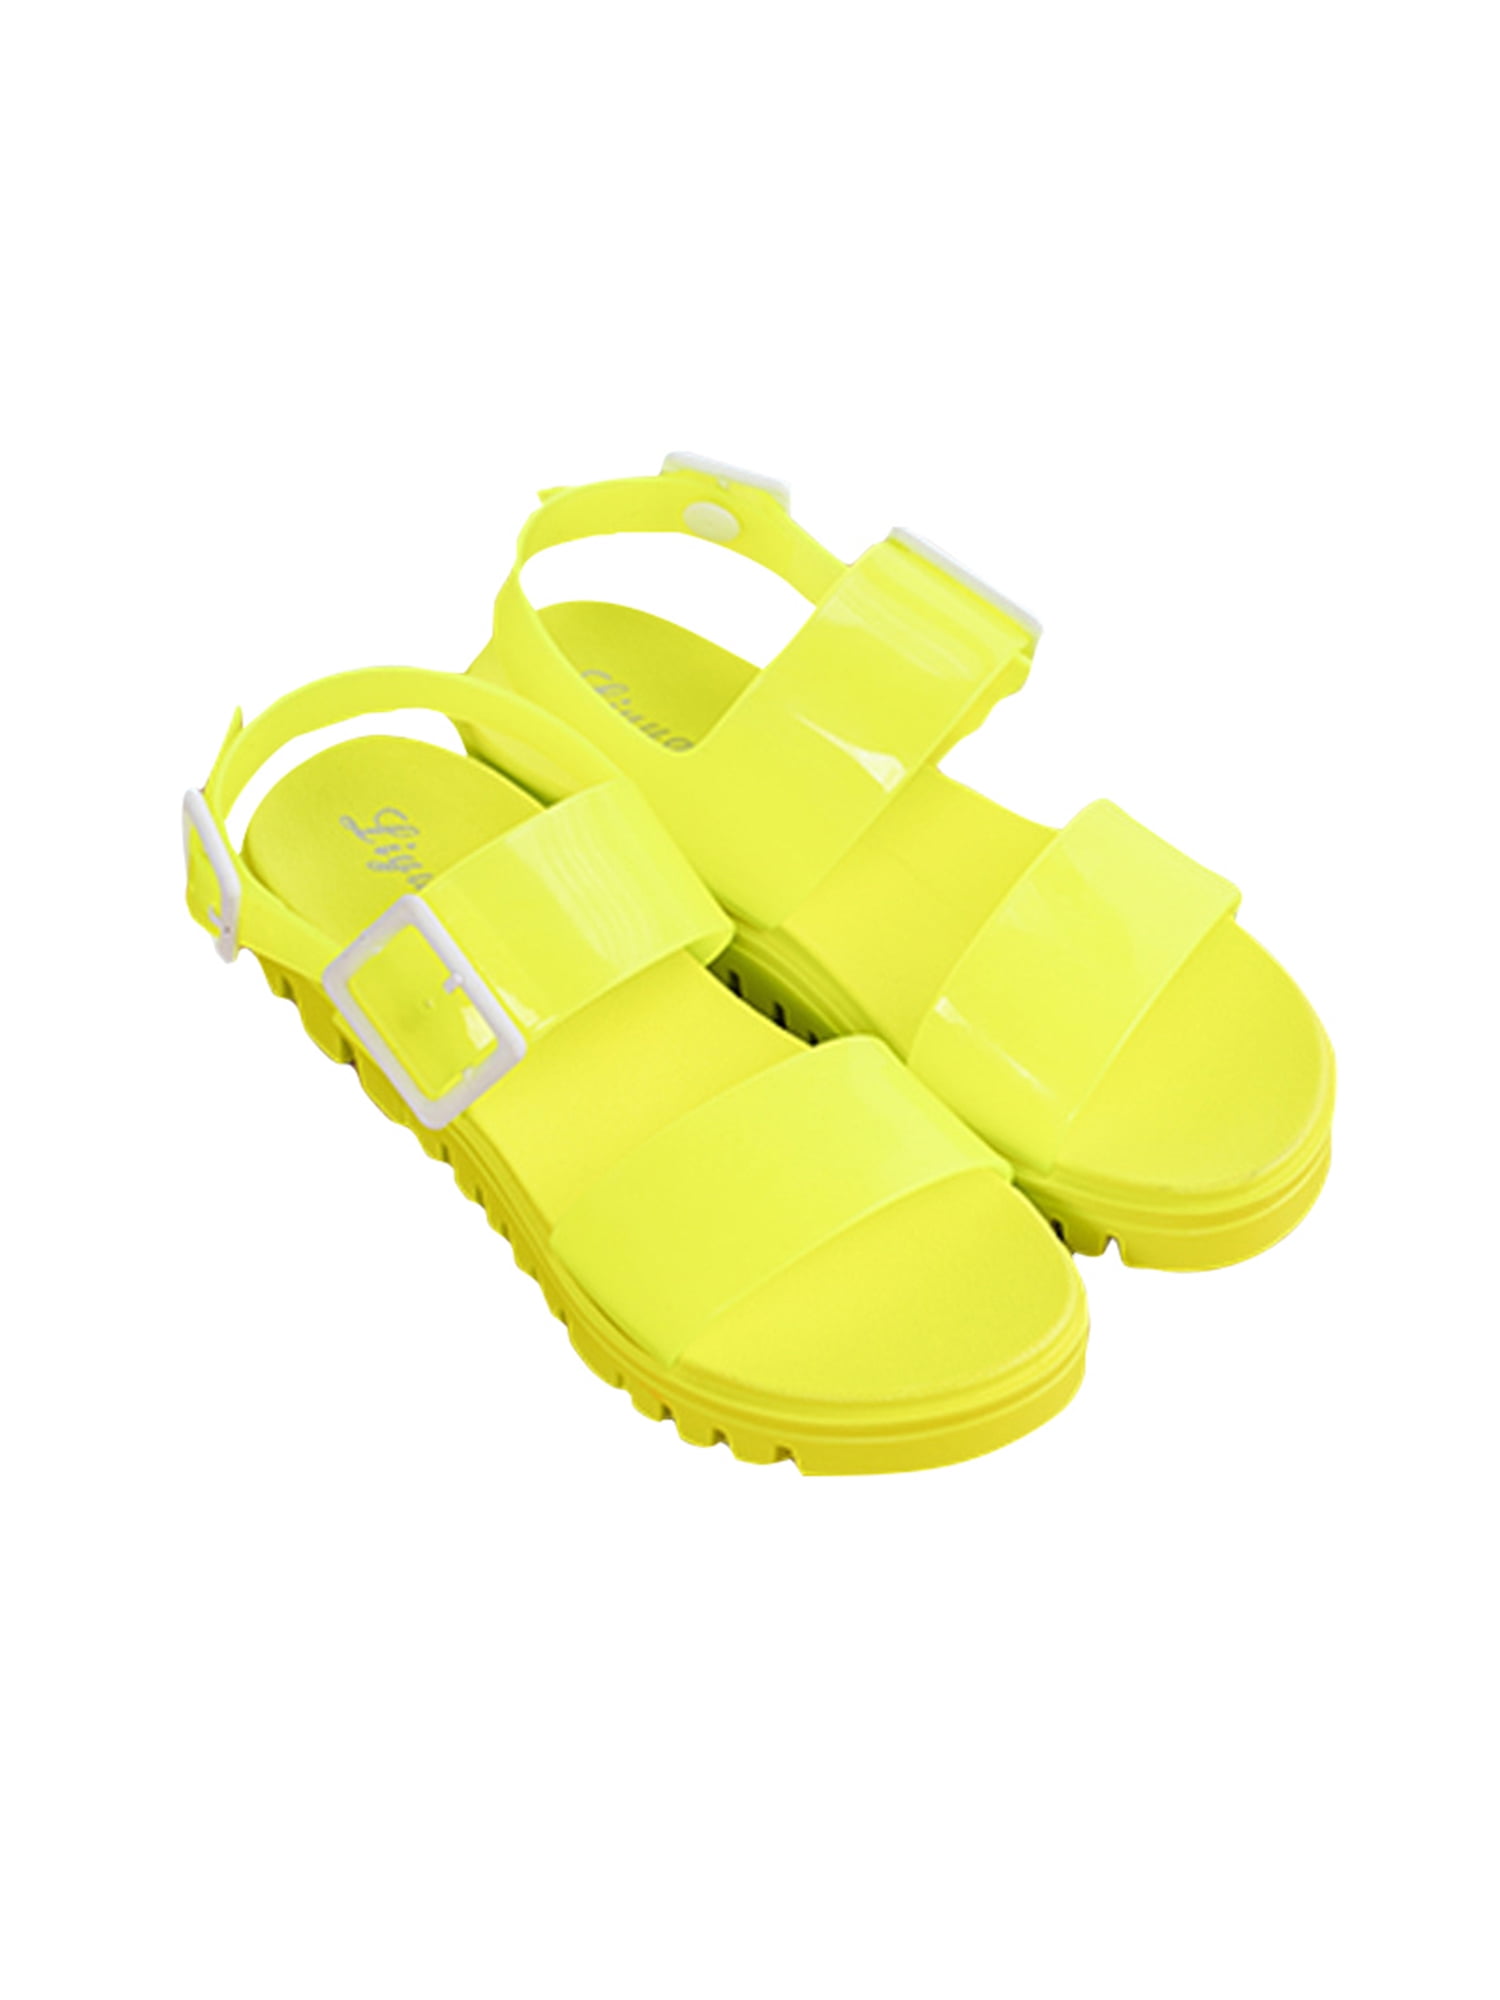 New women's shoes fashion jelly sandals t strap open toe casual summer yellow 